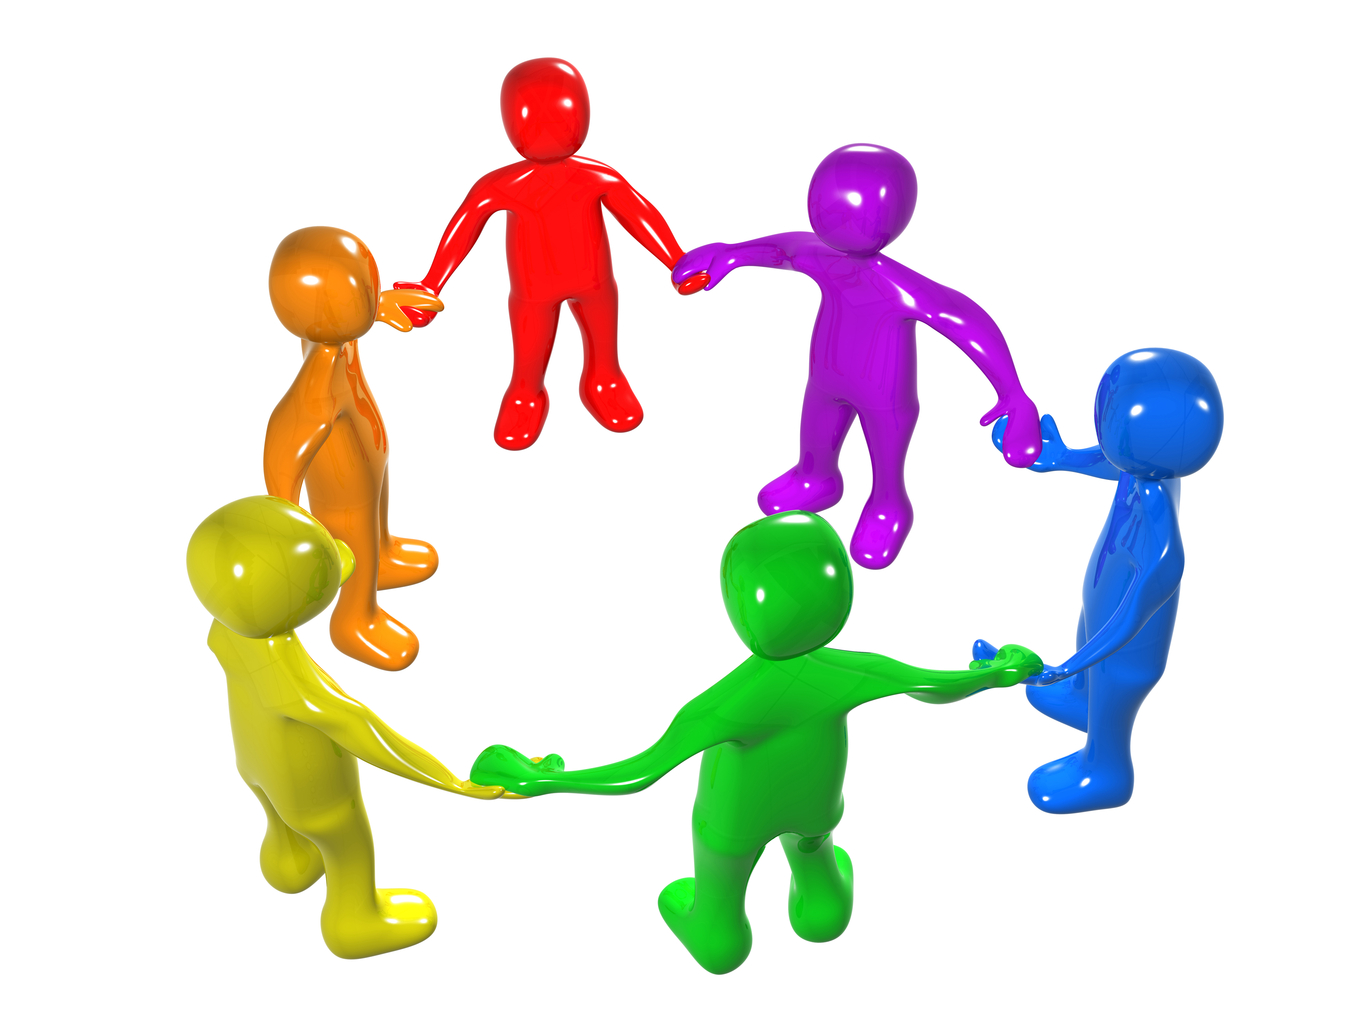 Free Working Together Images, Download Free Clip Art, Free.